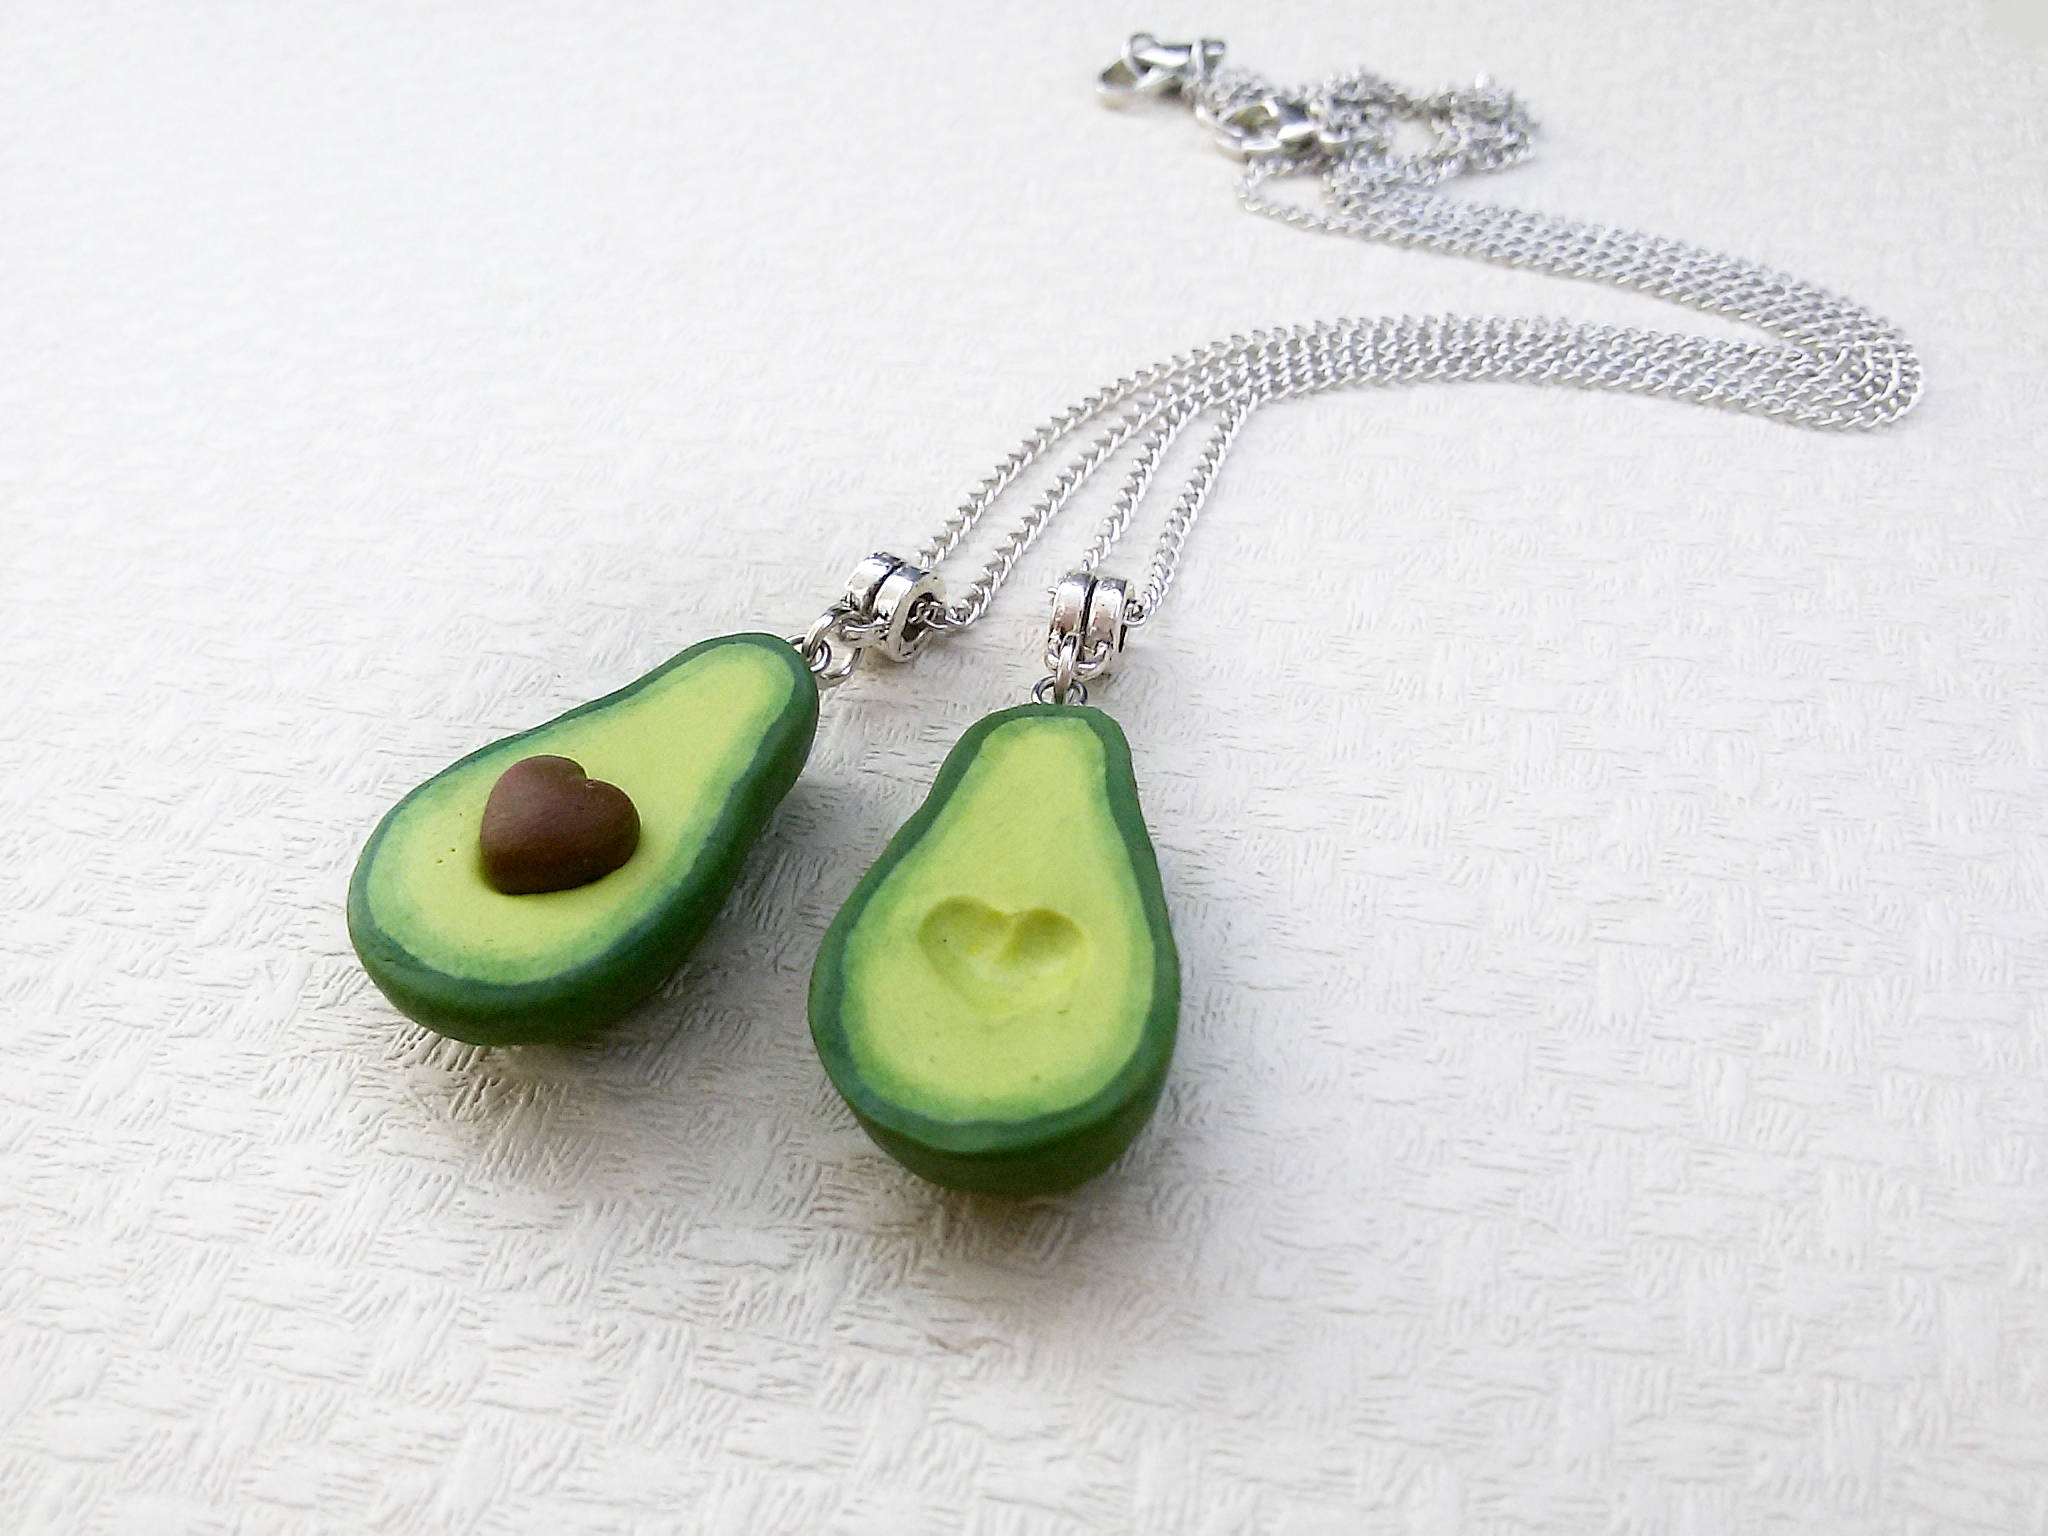 Avocado Heart Friendship Necklace Set for Two, Funny Silly Bff Best Friends  Besties Gift Ideas, Cute Lover Valentine's Gift, Miniature Food - Etsy | Friendship  necklaces, Matching necklaces for couples, Couple necklaces